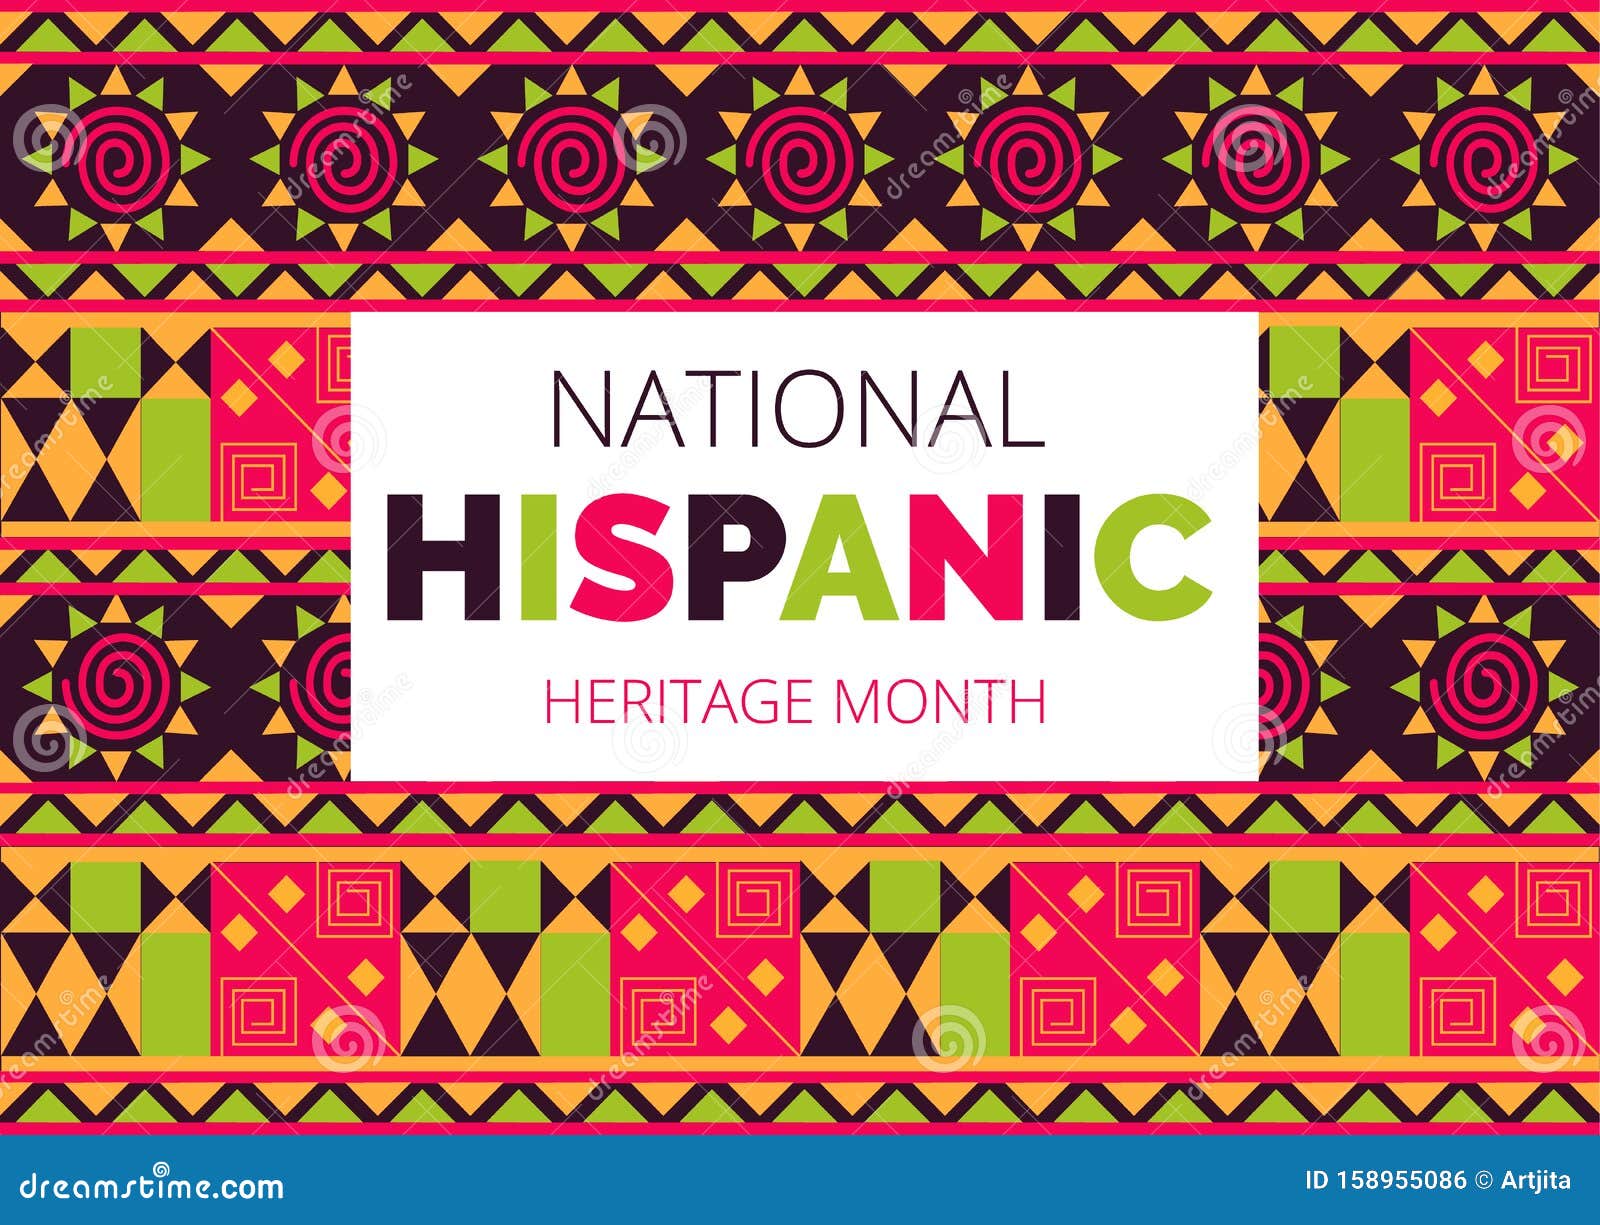 national hispanic heritage month celebrated from 15 september to 15 october usa. latino american ornament 